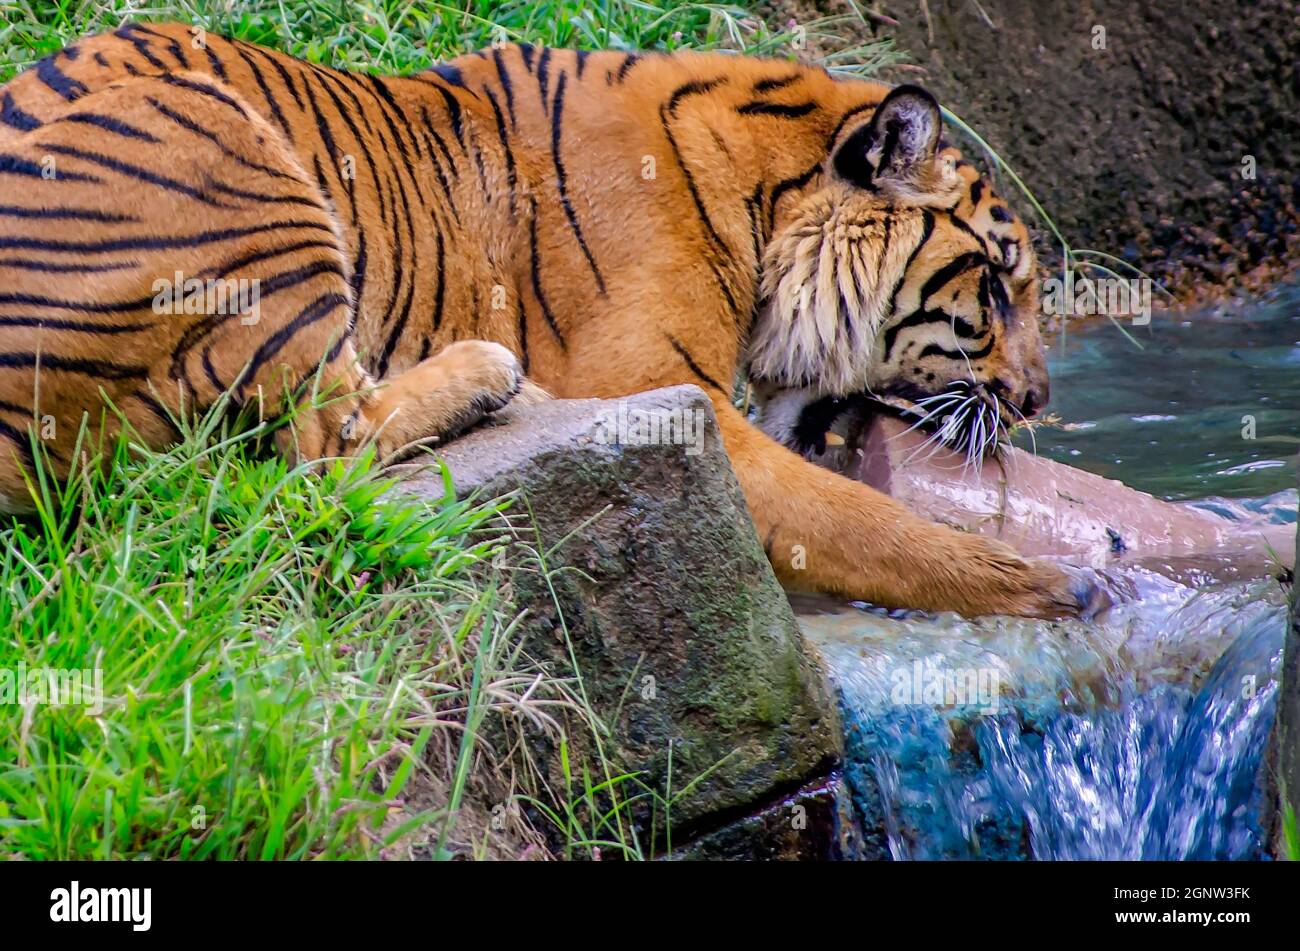 A Sumatran tiger (Panthera tigris sumatrae) plays in the water with an enrichment toy at the Memphis Zoo, Sept. 8, 2015, in Memphis, Tennessee. Stock Photo